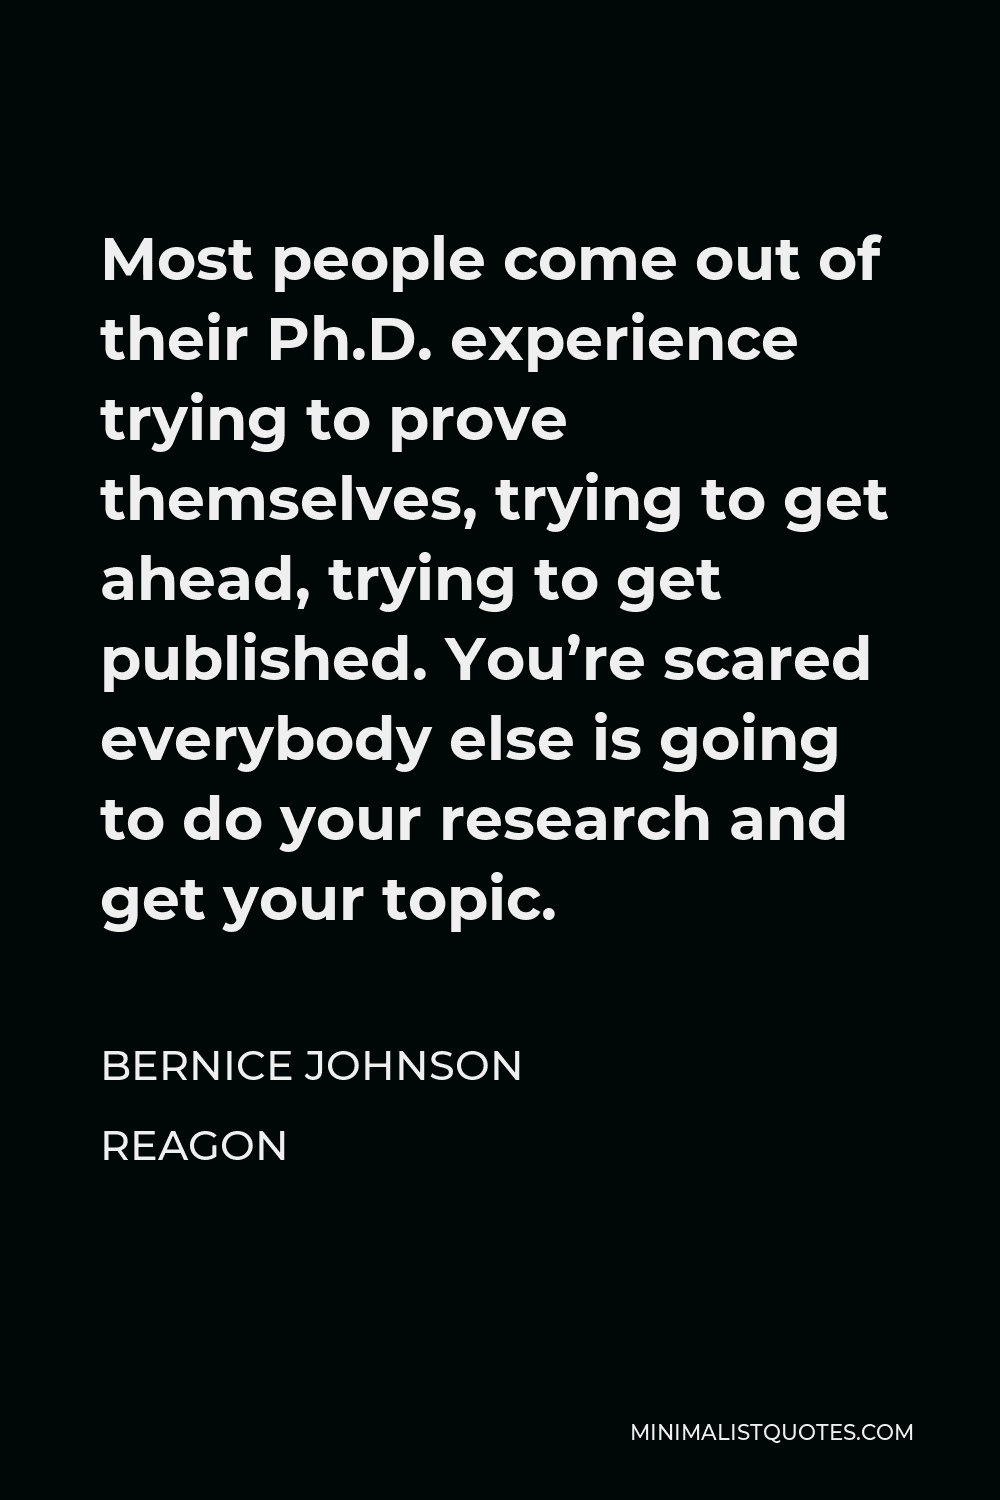 Bernice Johnson Reagon Quote - Most people come out of their Ph.D. experience trying to prove themselves, trying to get ahead, trying to get published. You’re scared everybody else is going to do your research and get your topic.